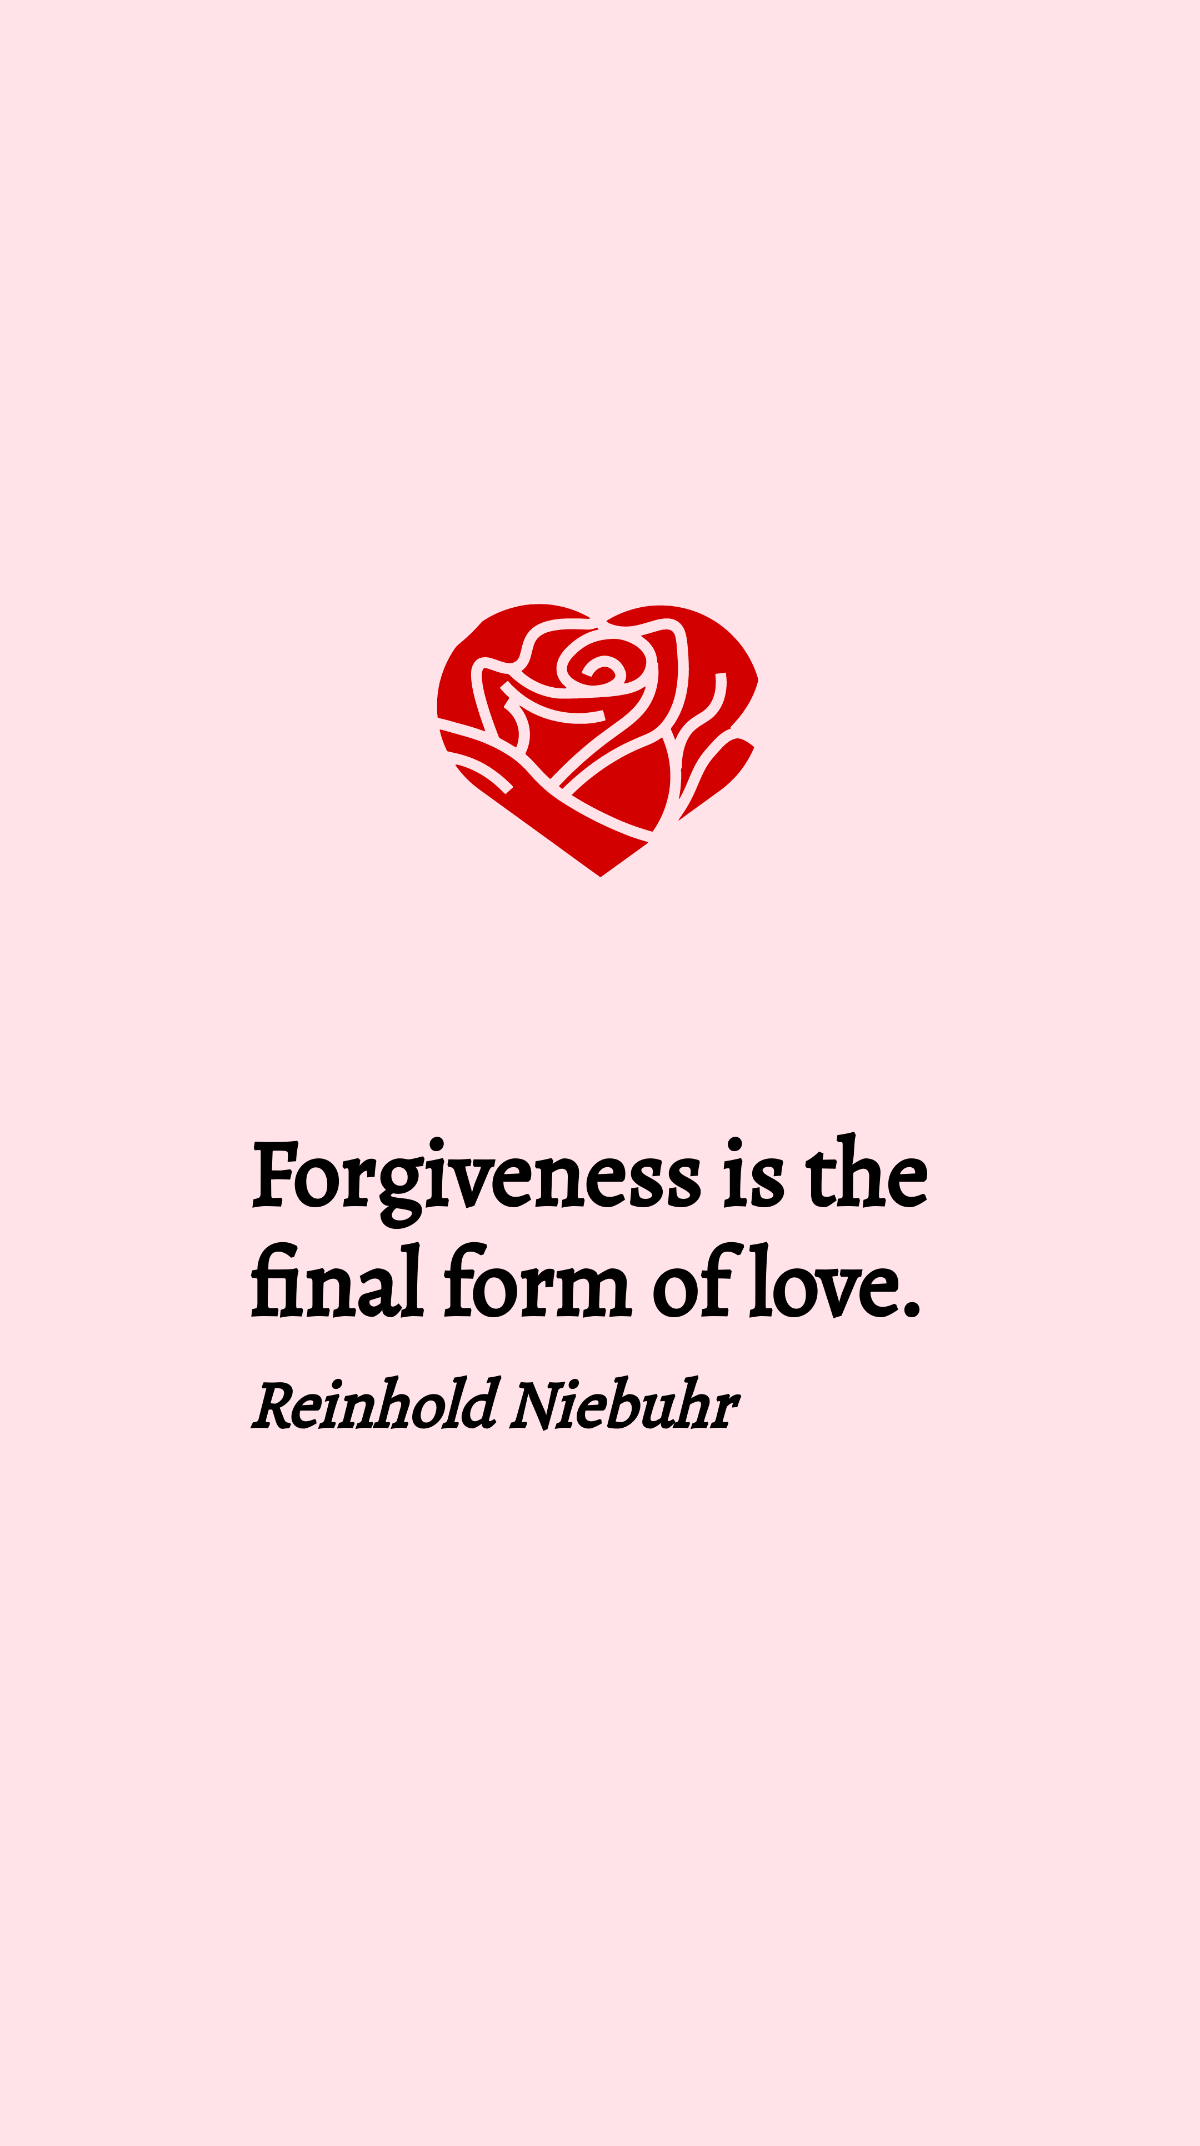 Reinhold Niebuhr - Forgiveness is the final form of love. Template